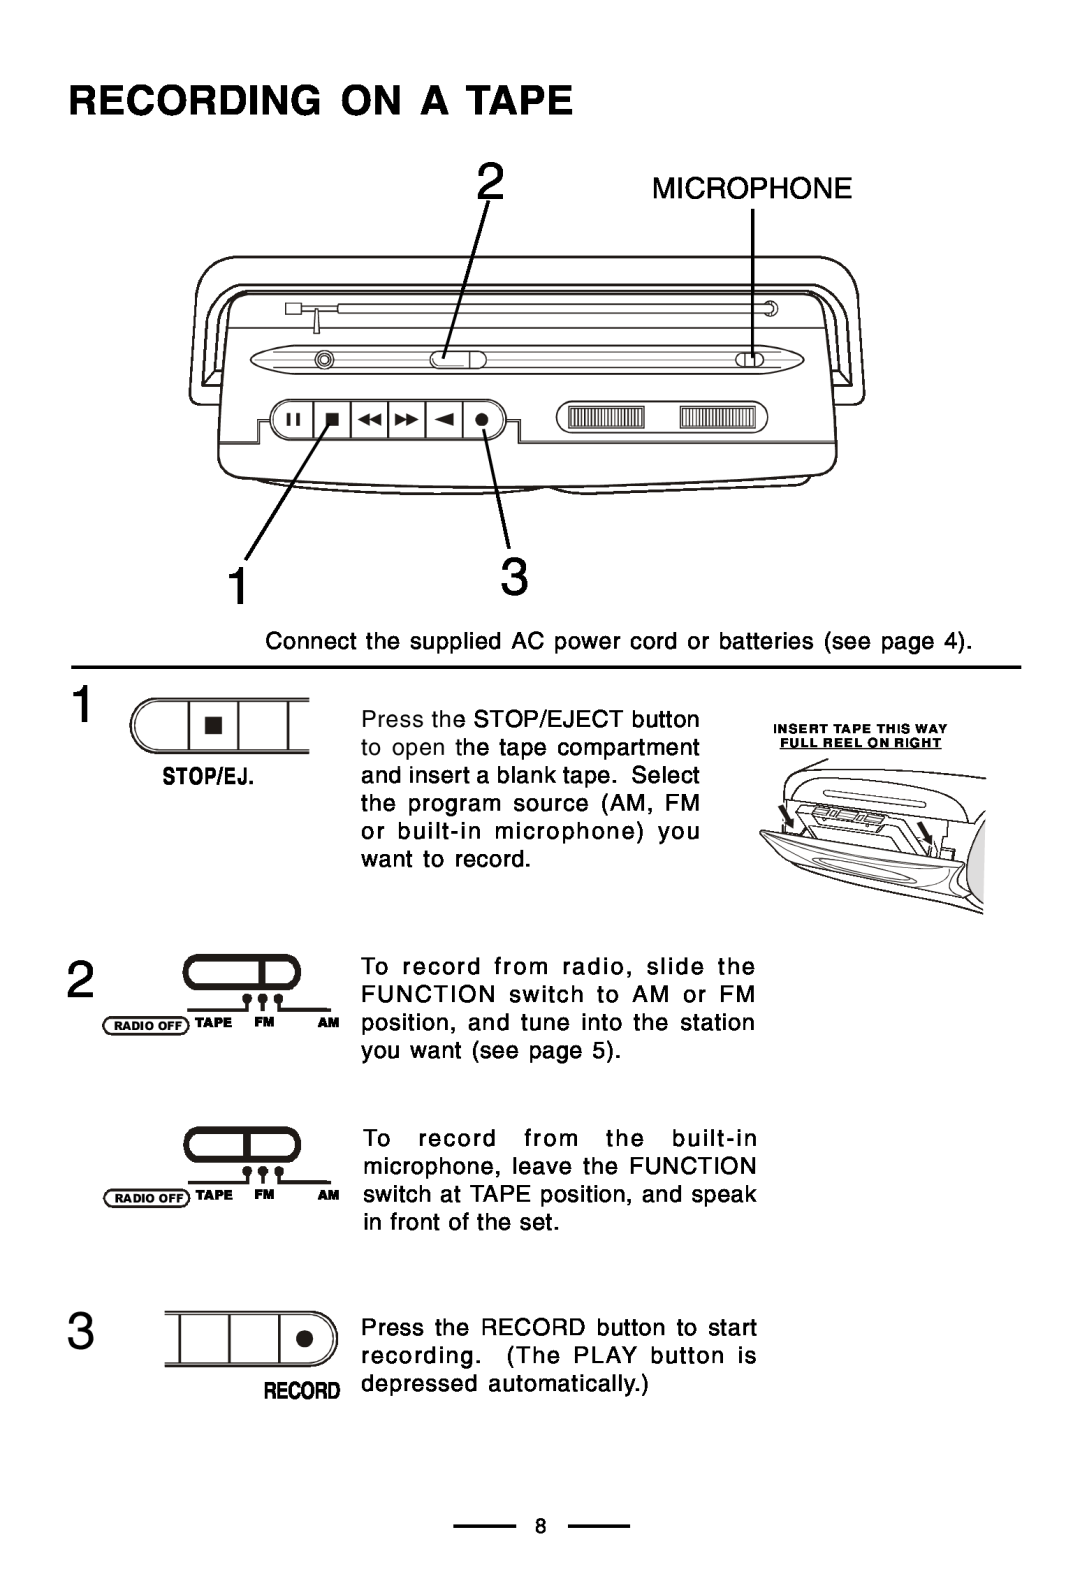 Lenoxx Electronics CT-99 operating instructions Recording On A Tape, Microphone 